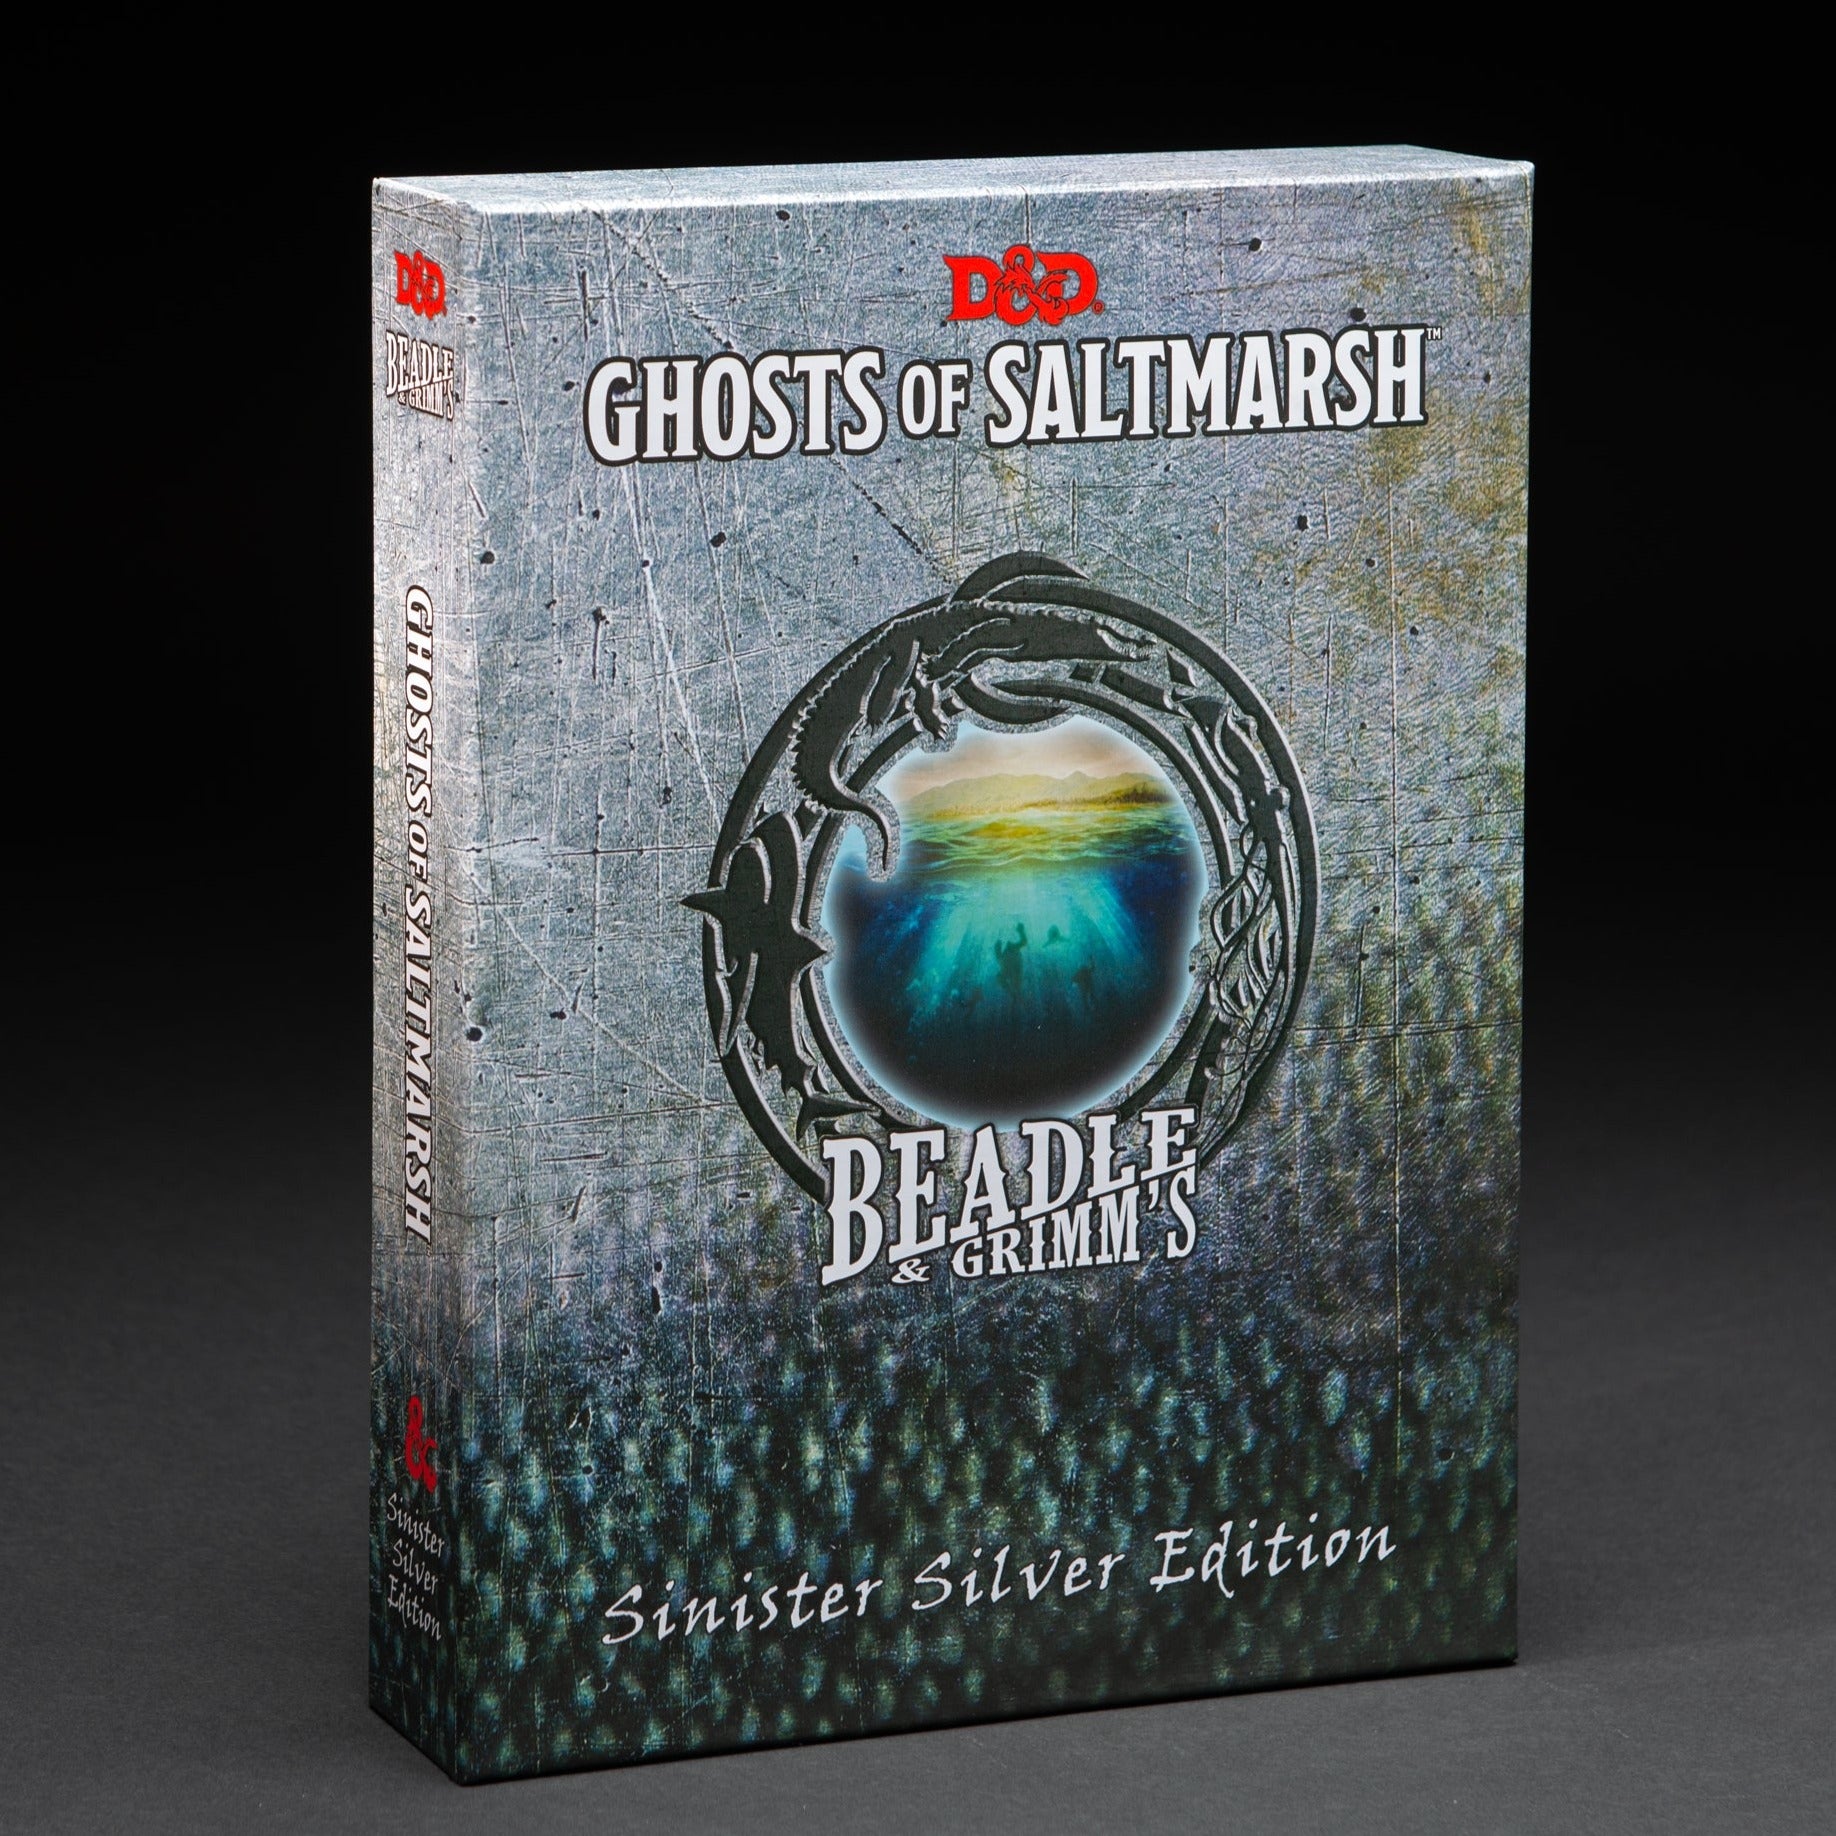 Sinister Silver Edition of Ghosts of Saltmarsh